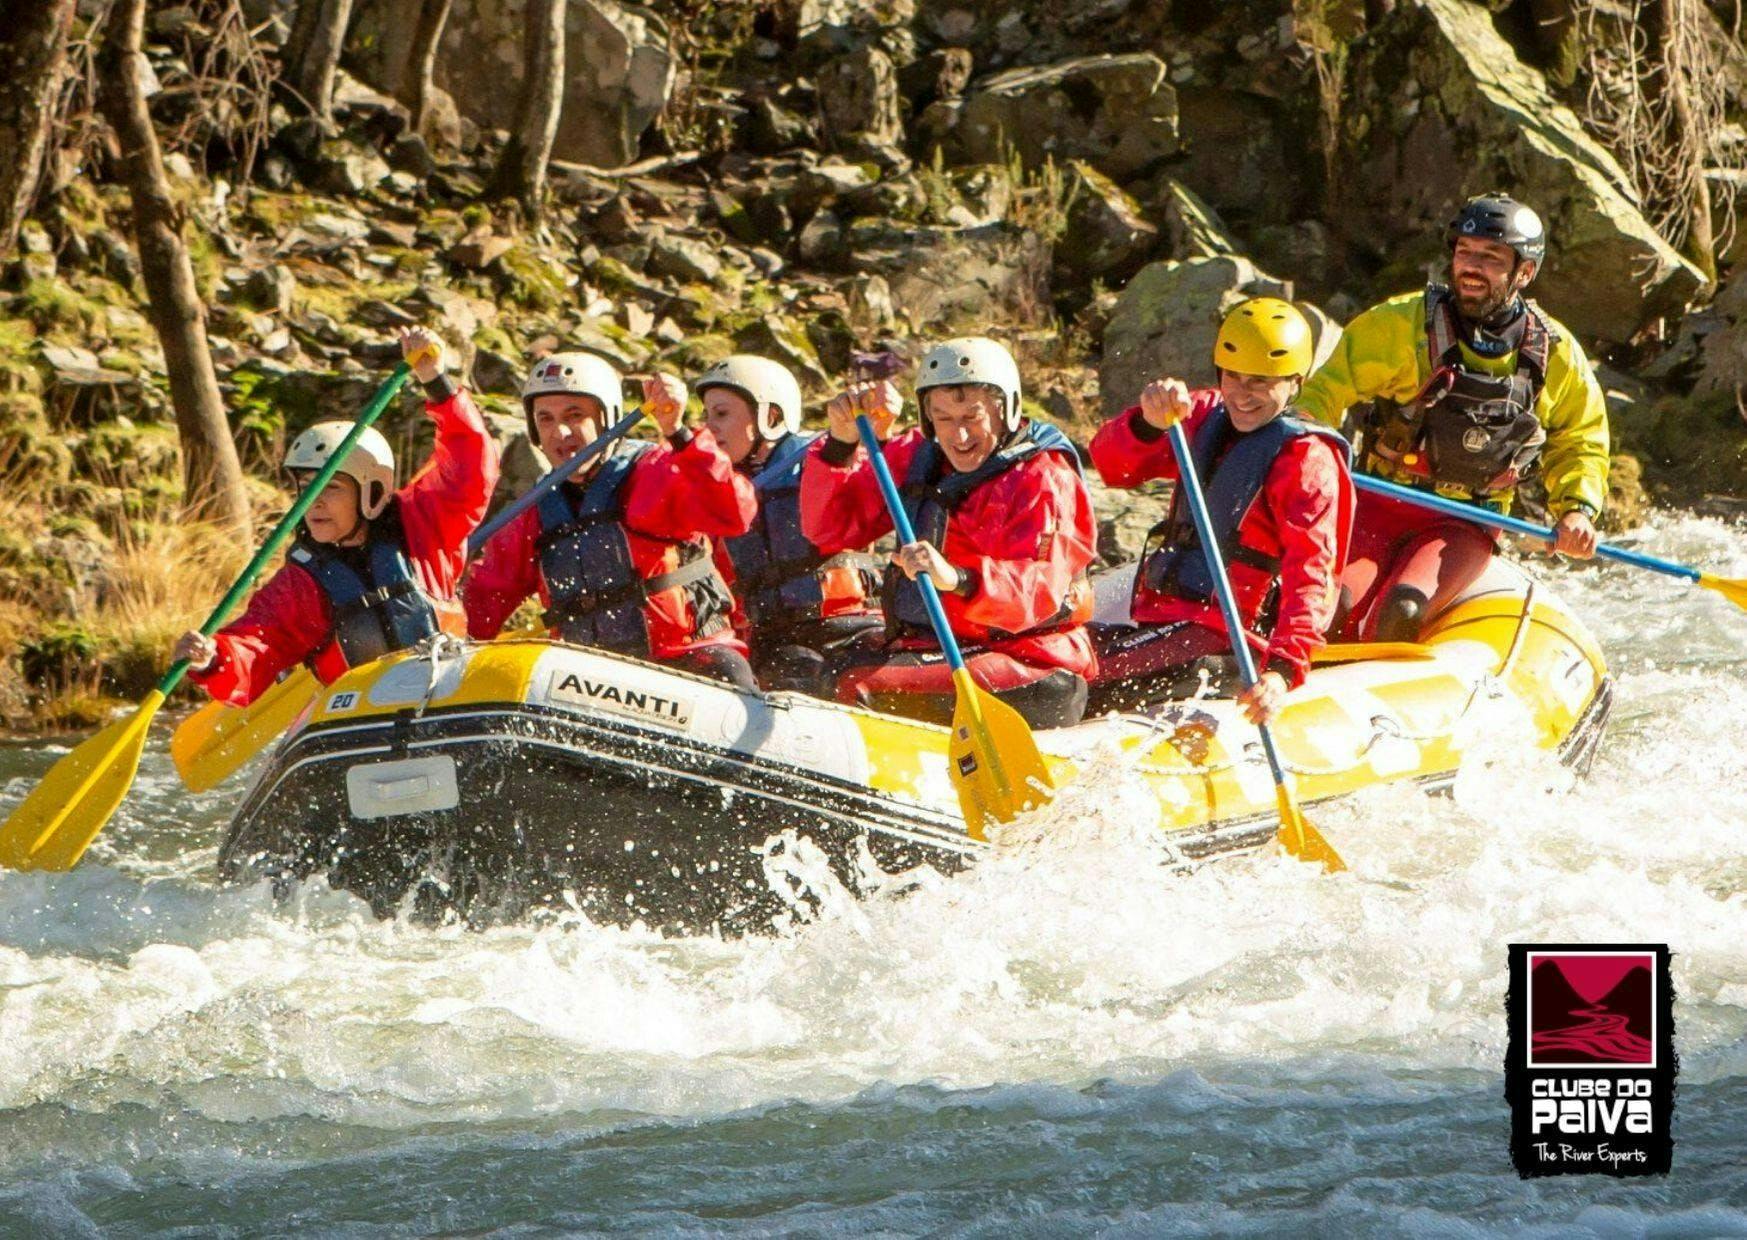 Paiva River rafting experience in Arouca Musement